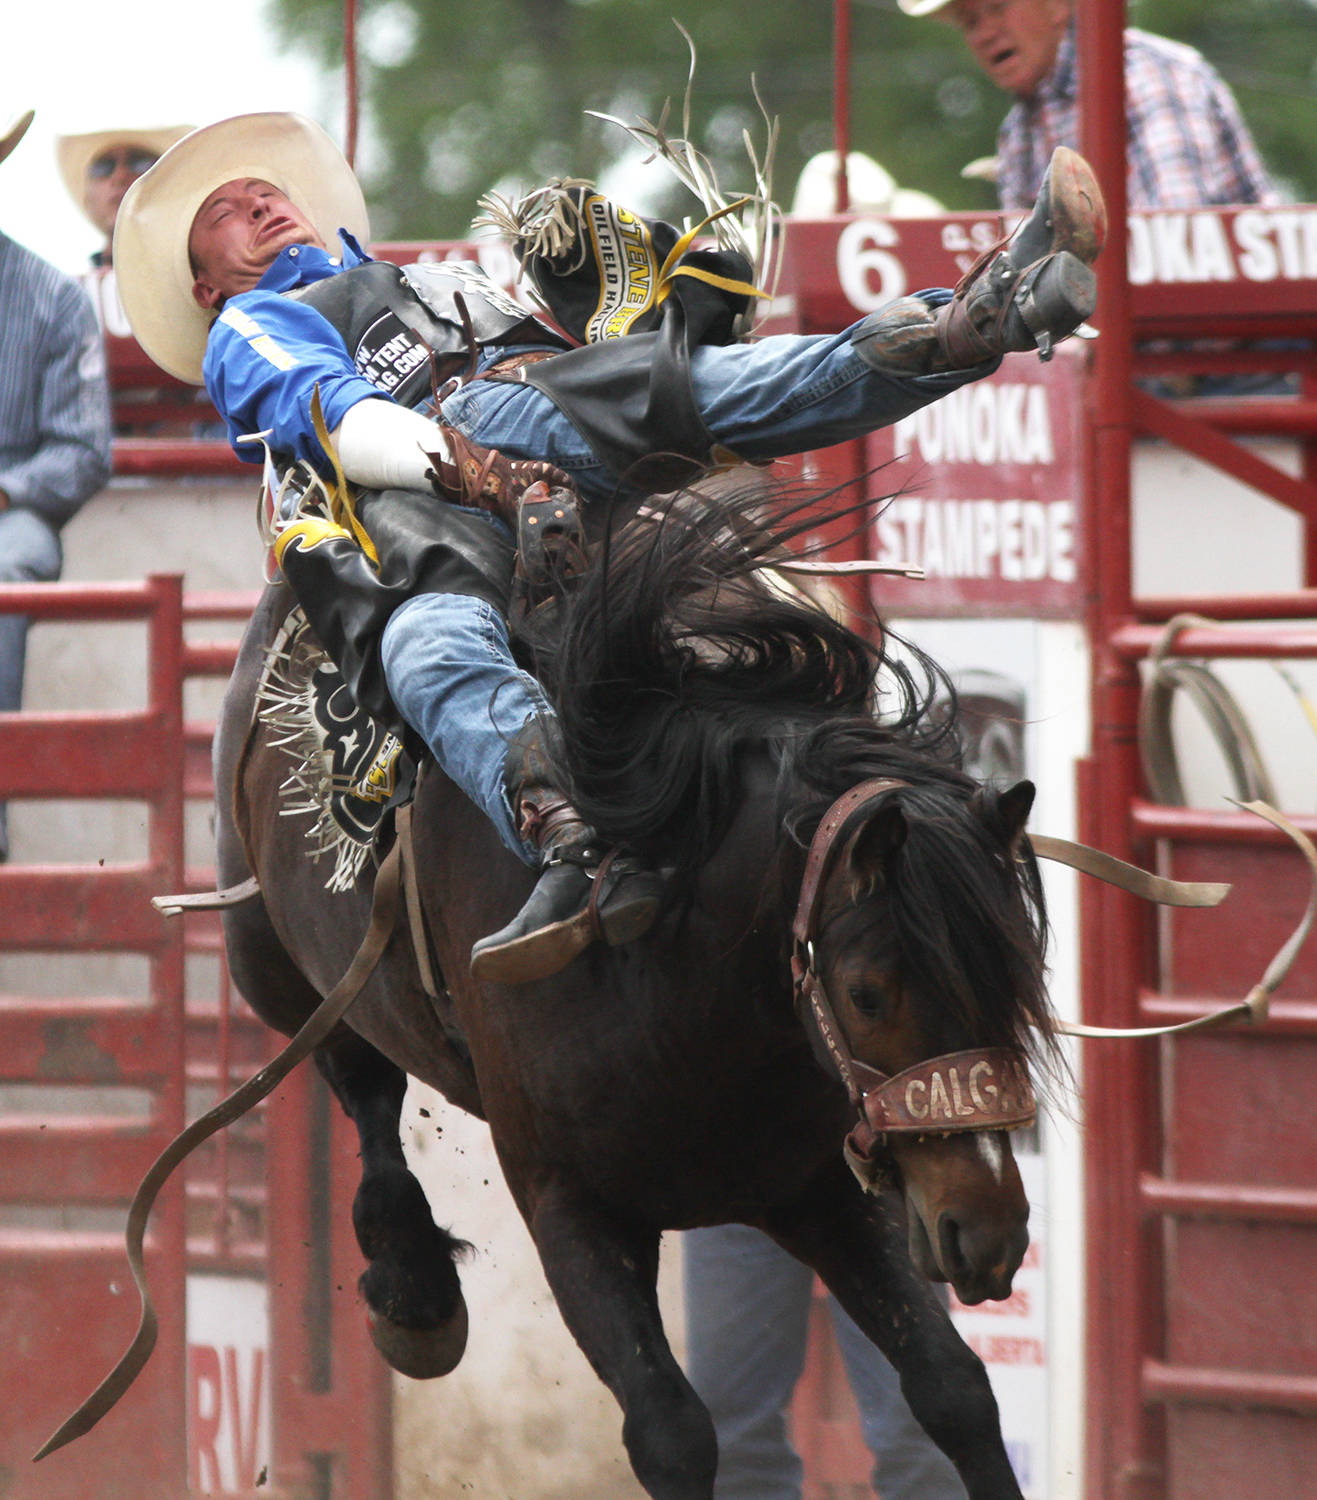 Airdrie’s Jake Vold makes a solid 88.75 ride on Not Crystal Friday afternoon to land him the first place spot of the bareback riding at Ponoka Stampede. The top 12 competitors in each event will head to the rodeo finals July 2 for a chance at the top four final rodeo showdown in the evening. Photos by Jeffrey Heyden-Kaye